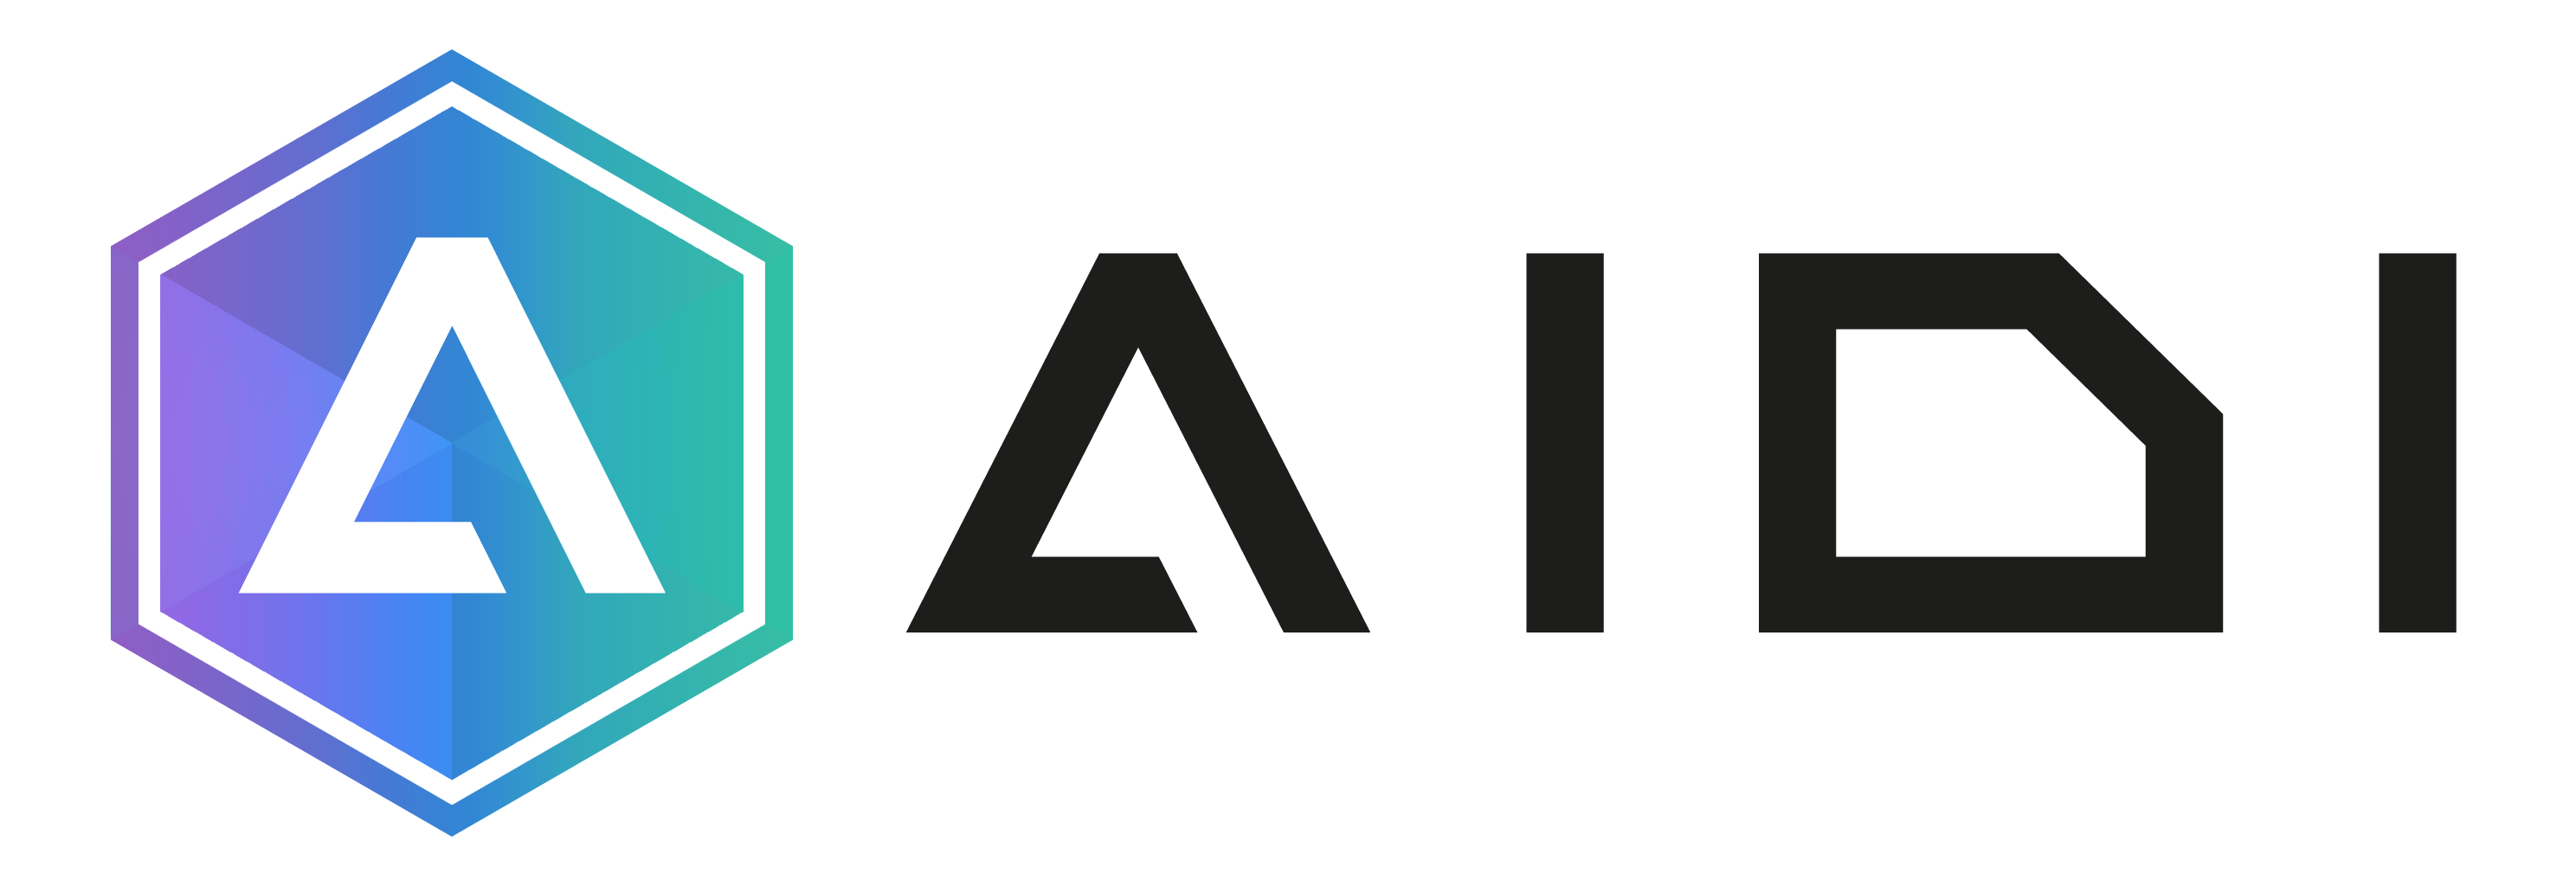 AIDI Finance Officially Launches on the Ethereum Network